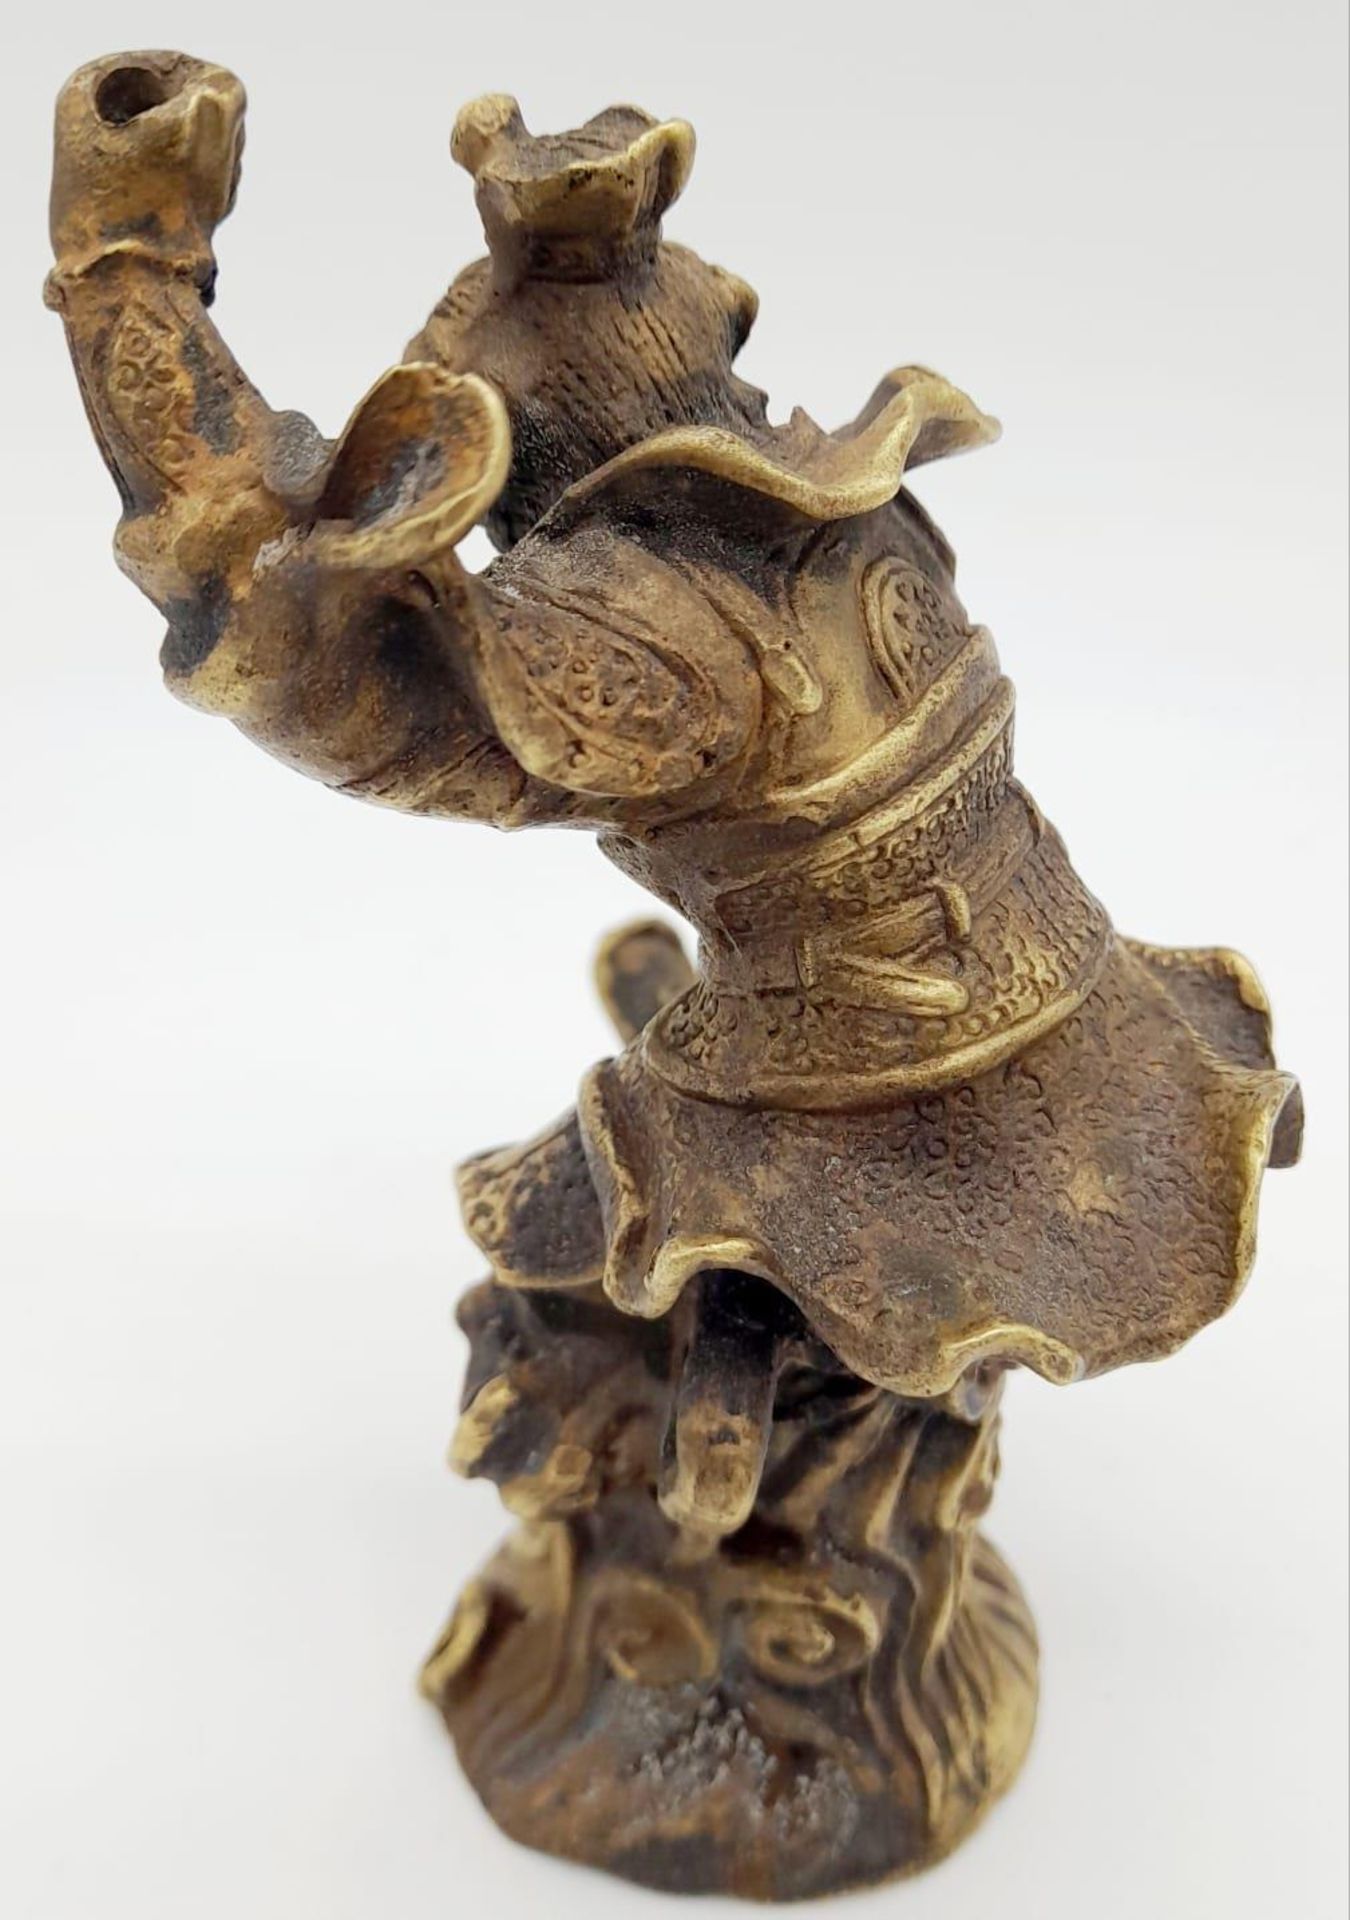 An Antique (Mid 19th Century) Chinese Monkey God Bronze Figure. Excellent casting and detail. - Image 5 of 7